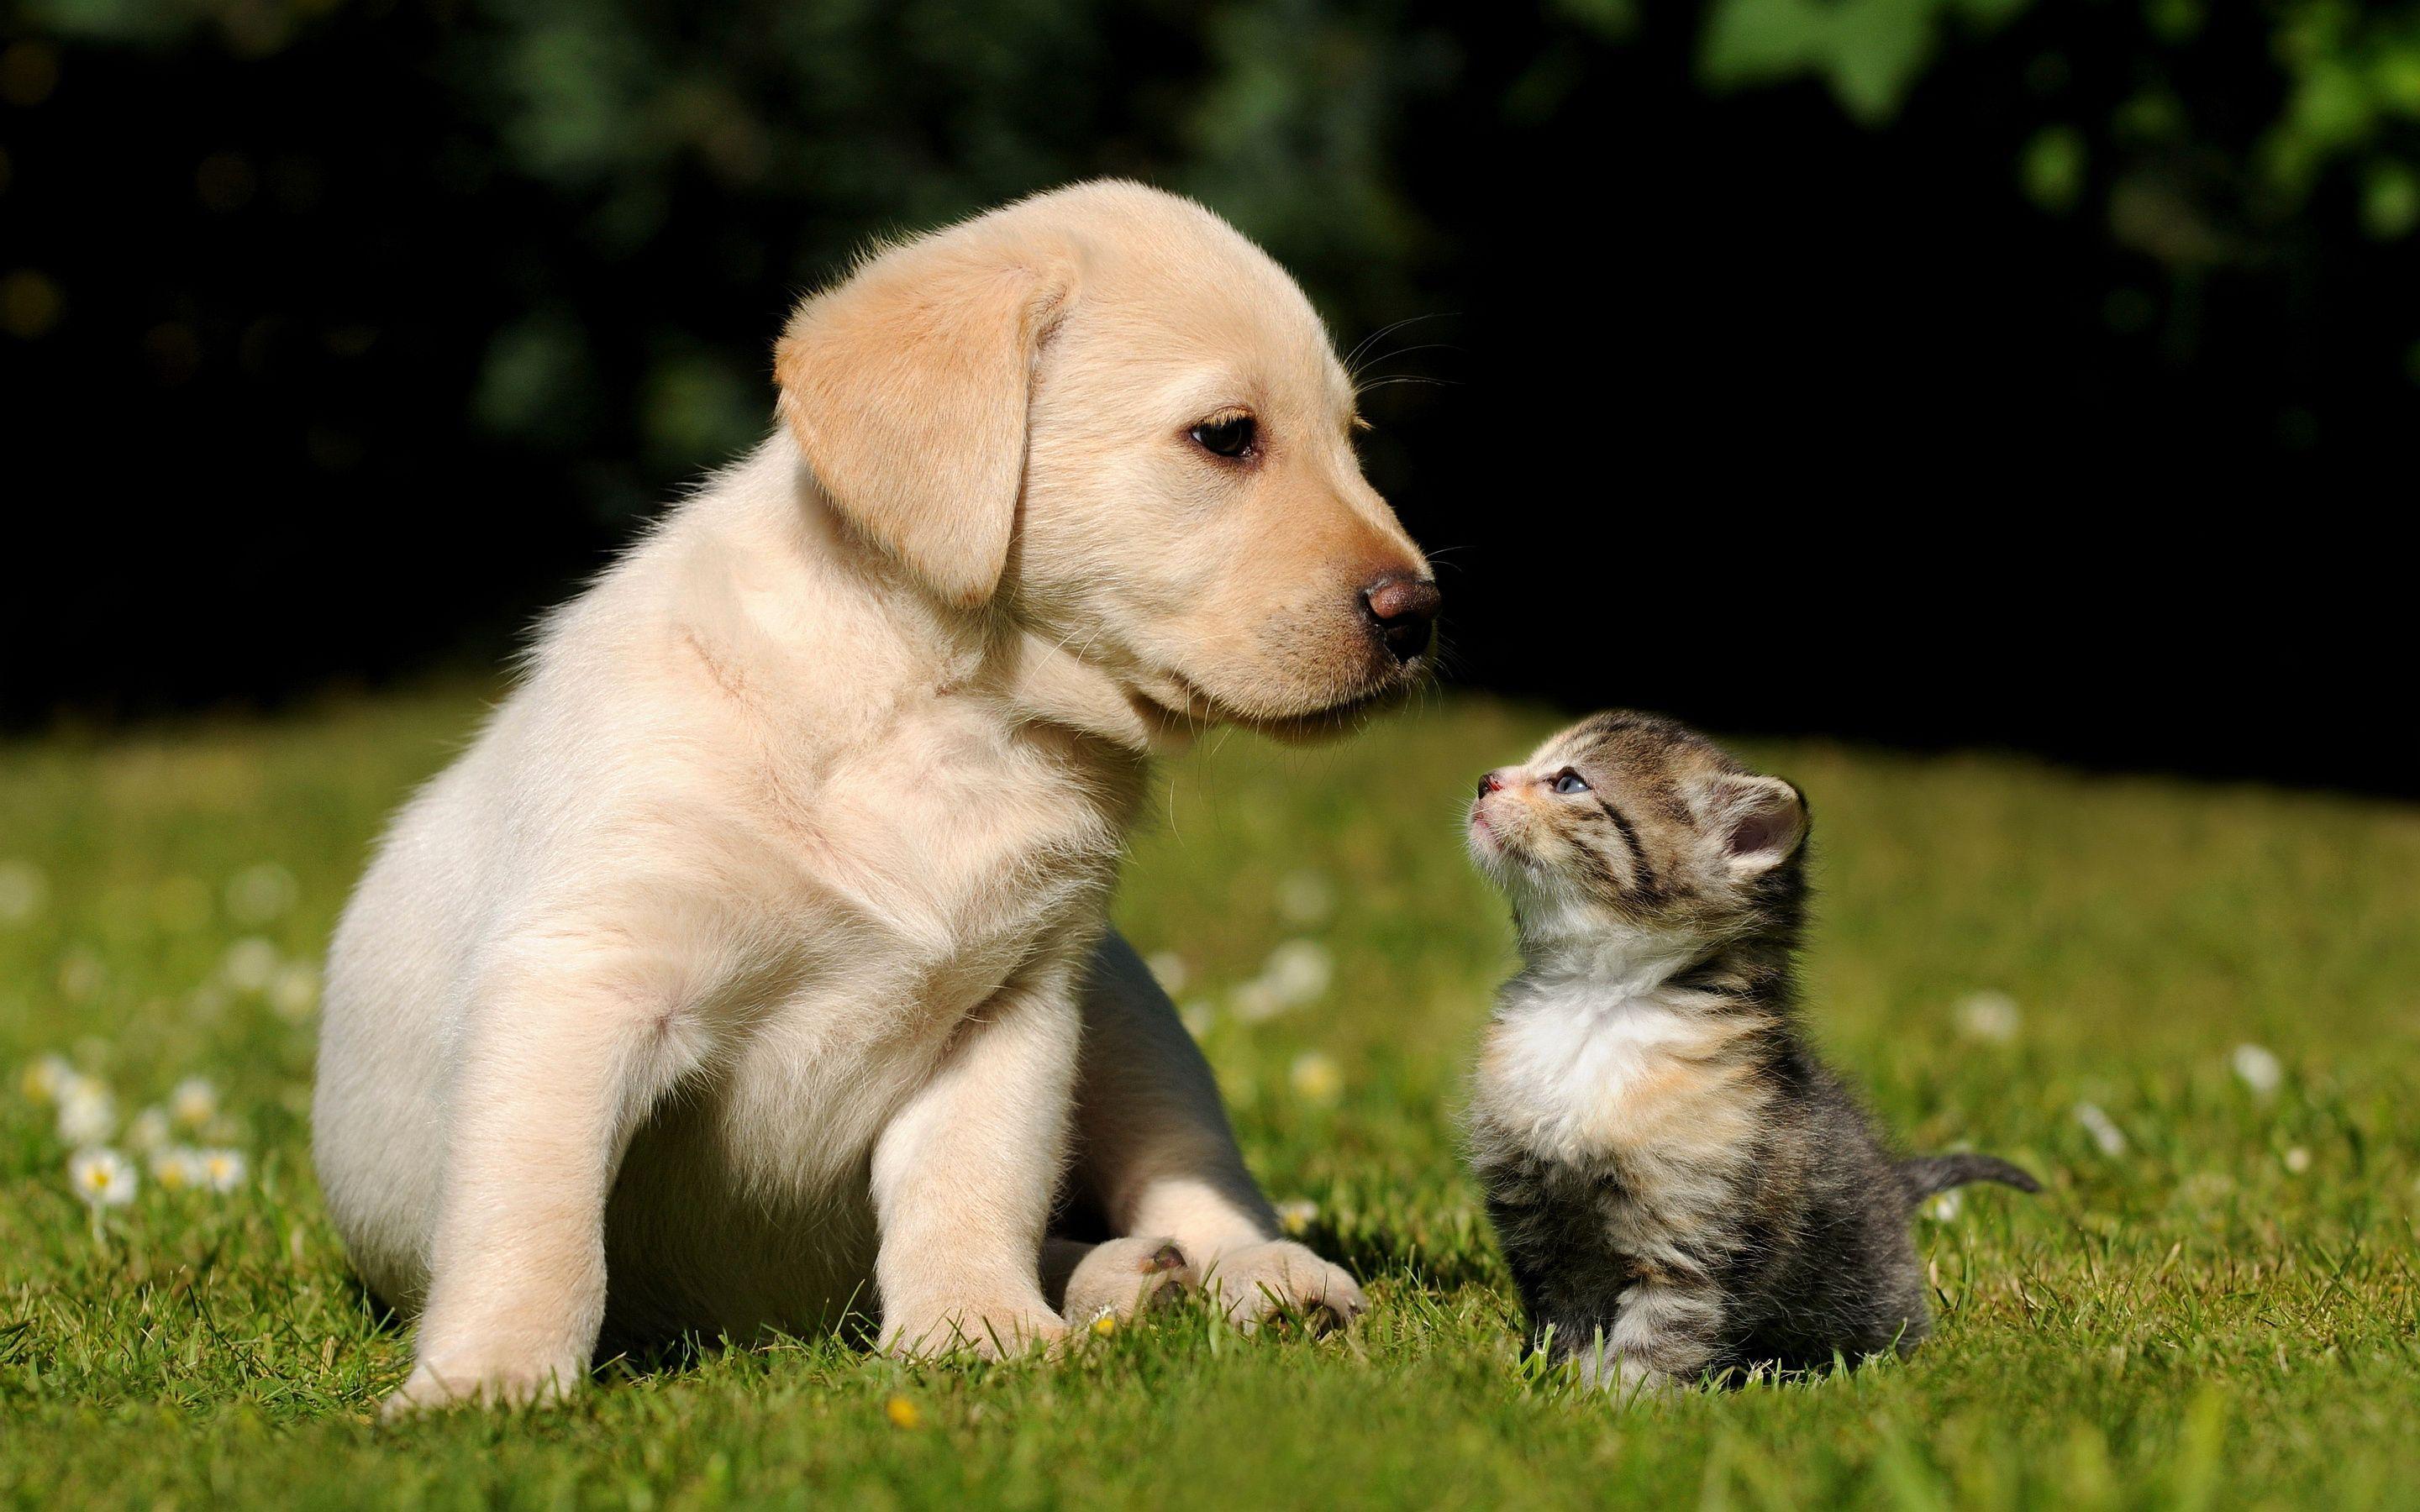 cute baby kittens and puppies together